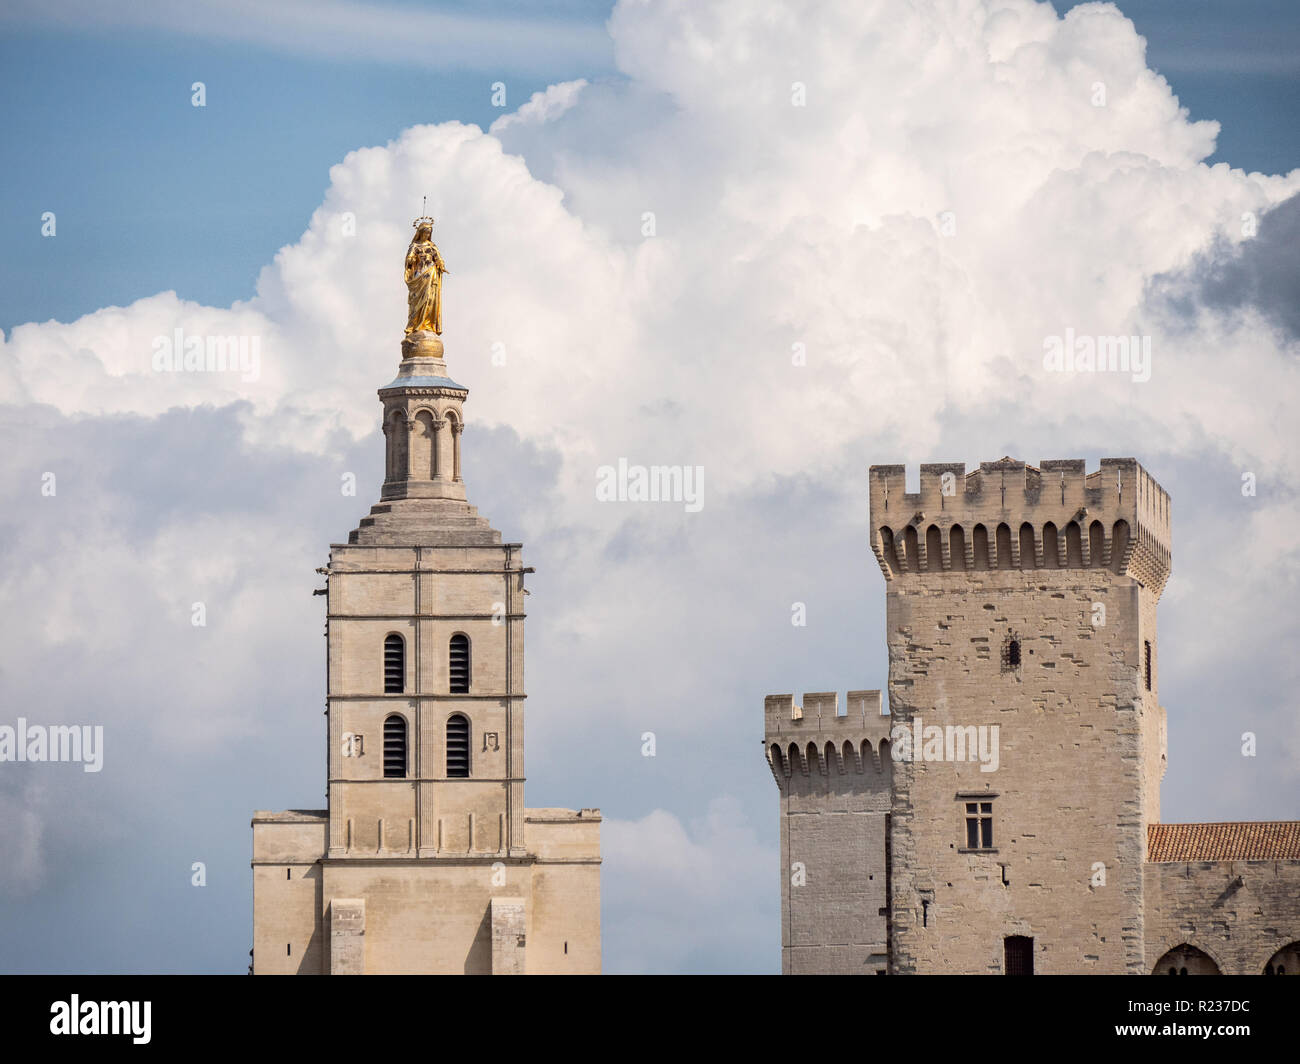 The Papal palace, an historical palace located in Avignon, southern France. It is one of the largest and most important medieval Gothic buildings in E Stock Photo